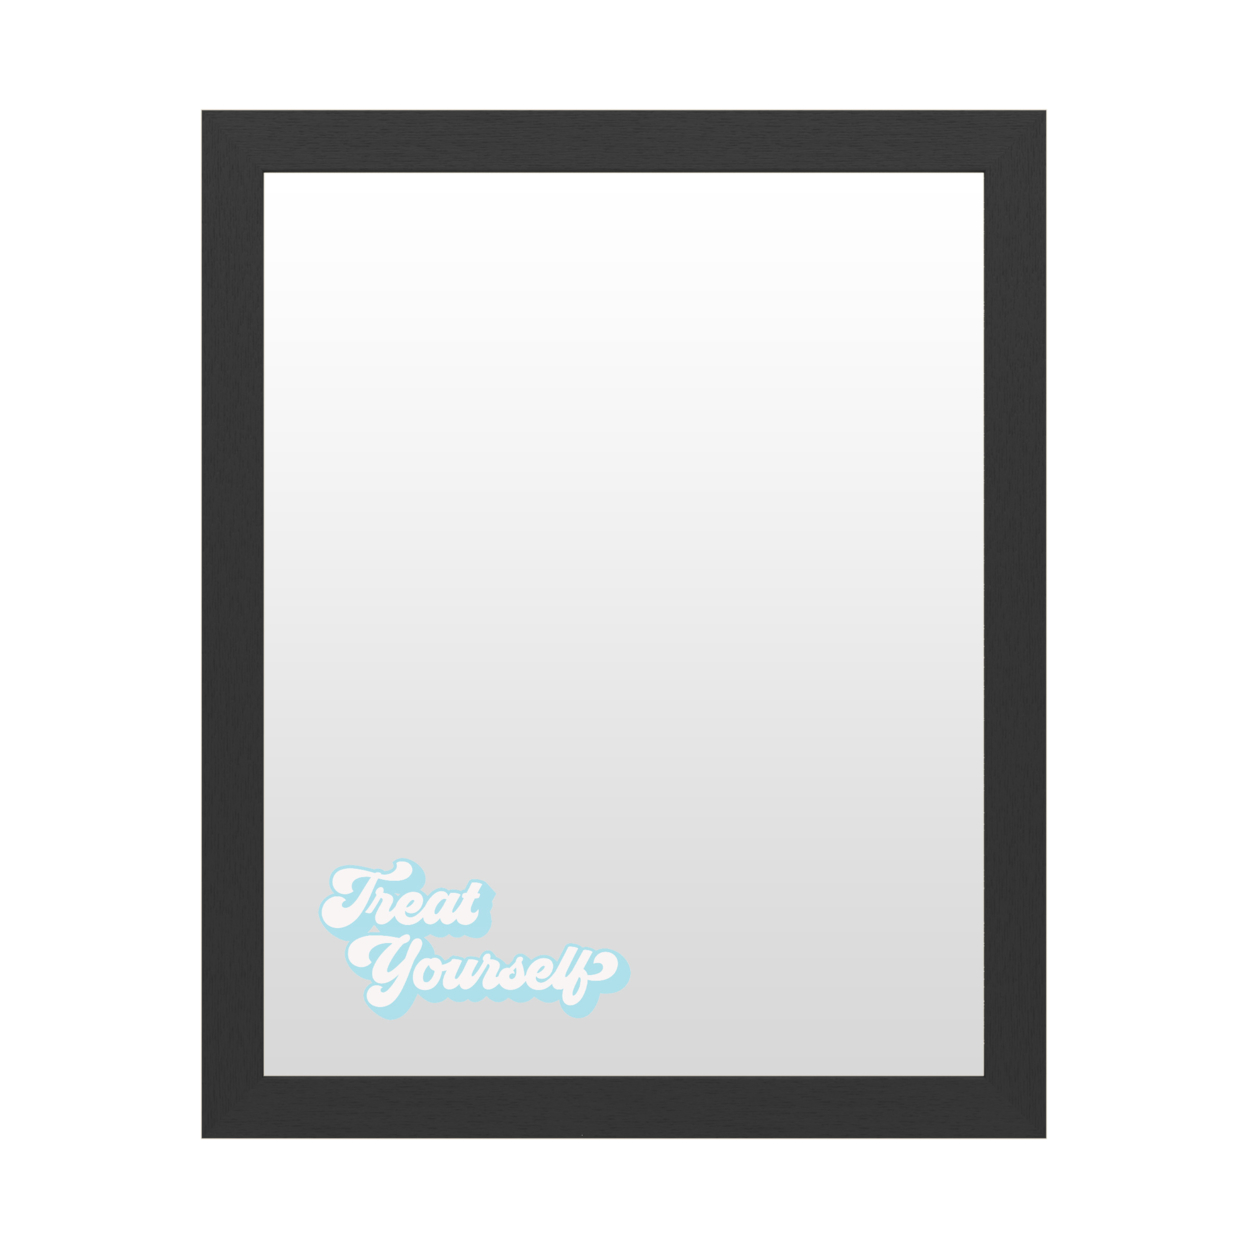 Dry Erase 16 X 20 Marker Board With Printed Artwork - Treat Yourself Light Blue White Board - Ready To Hang